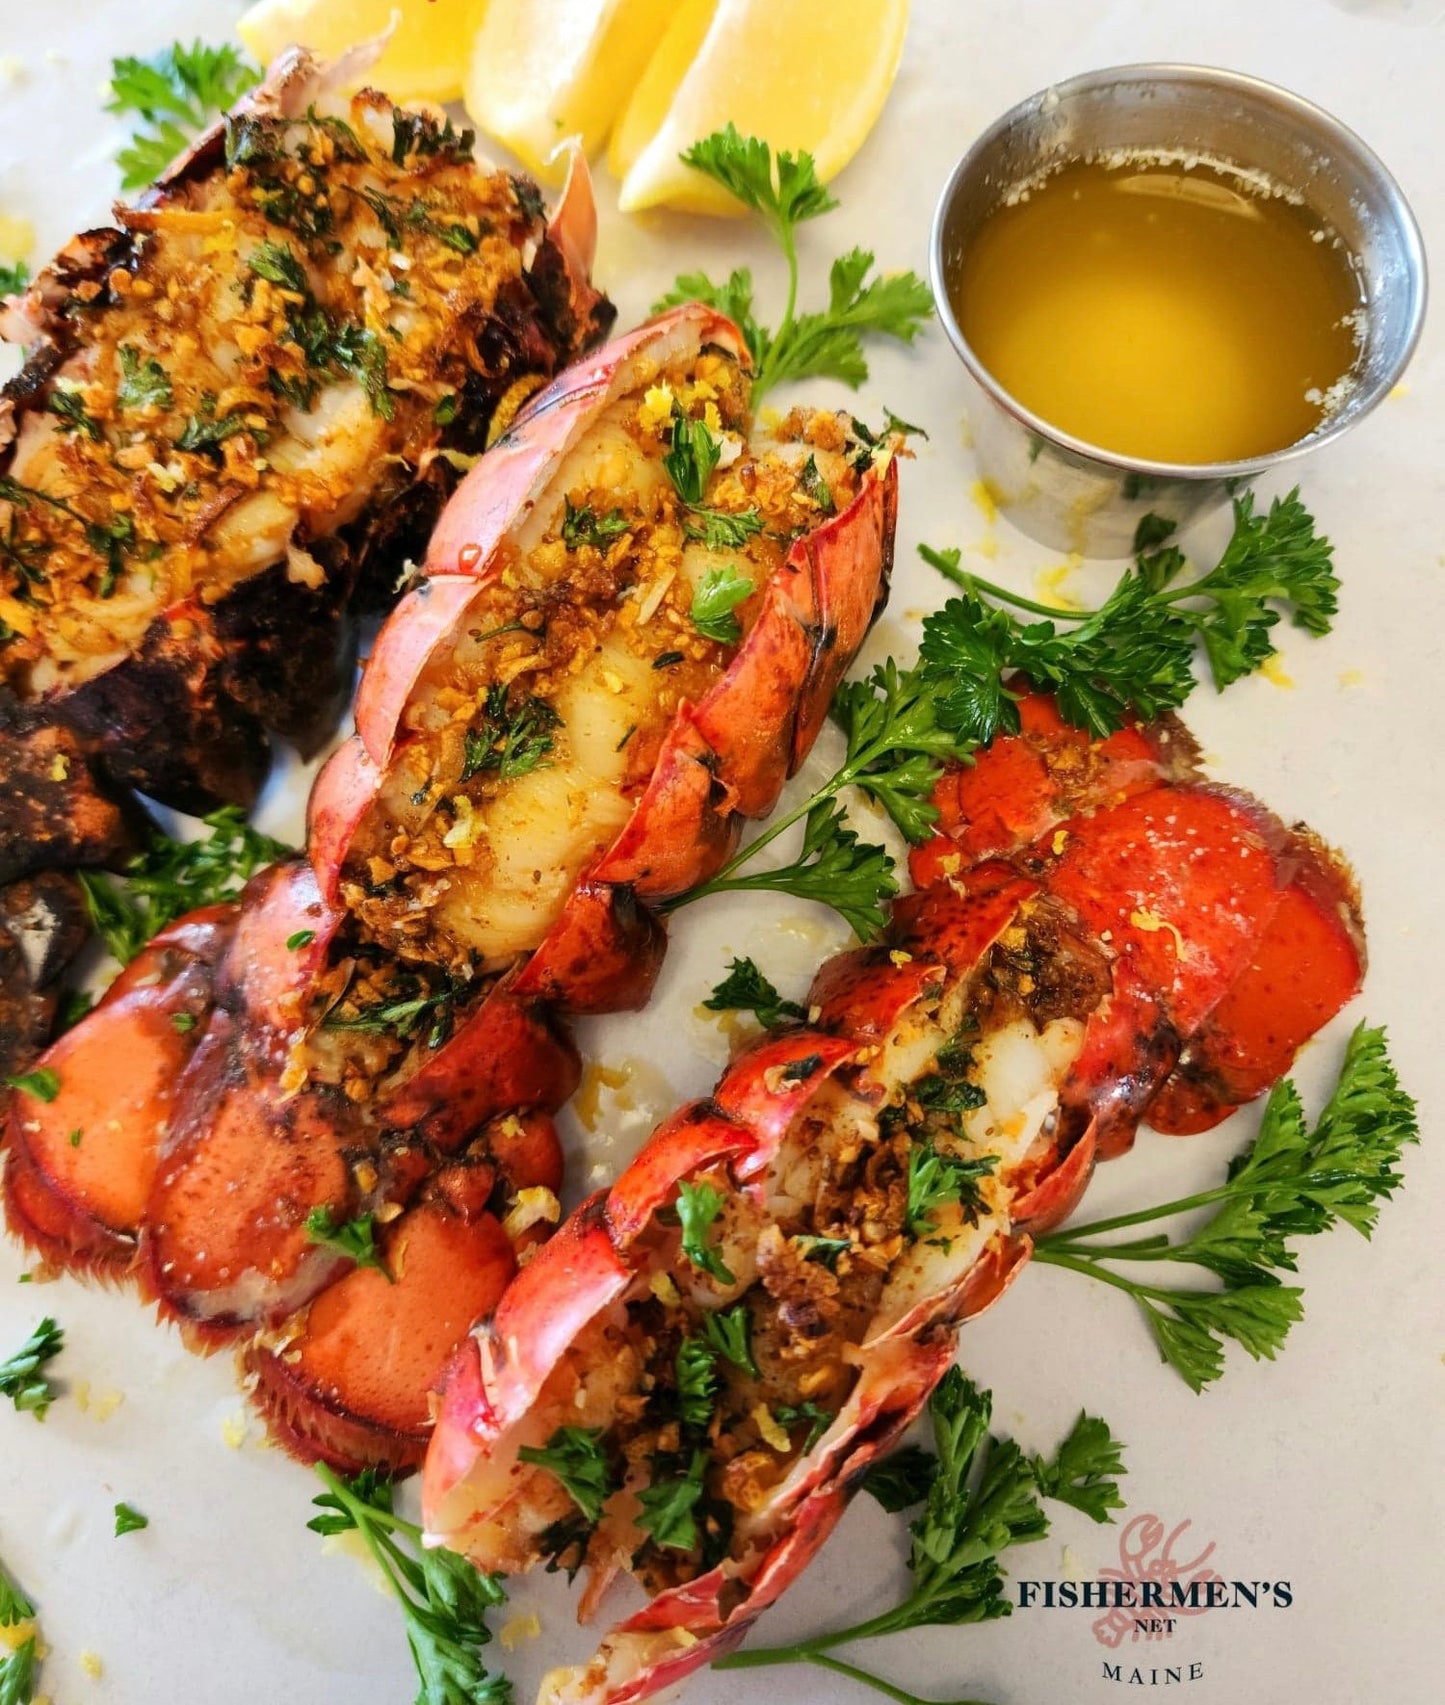 WILD 6-7 oz. Canadian Lobster tails